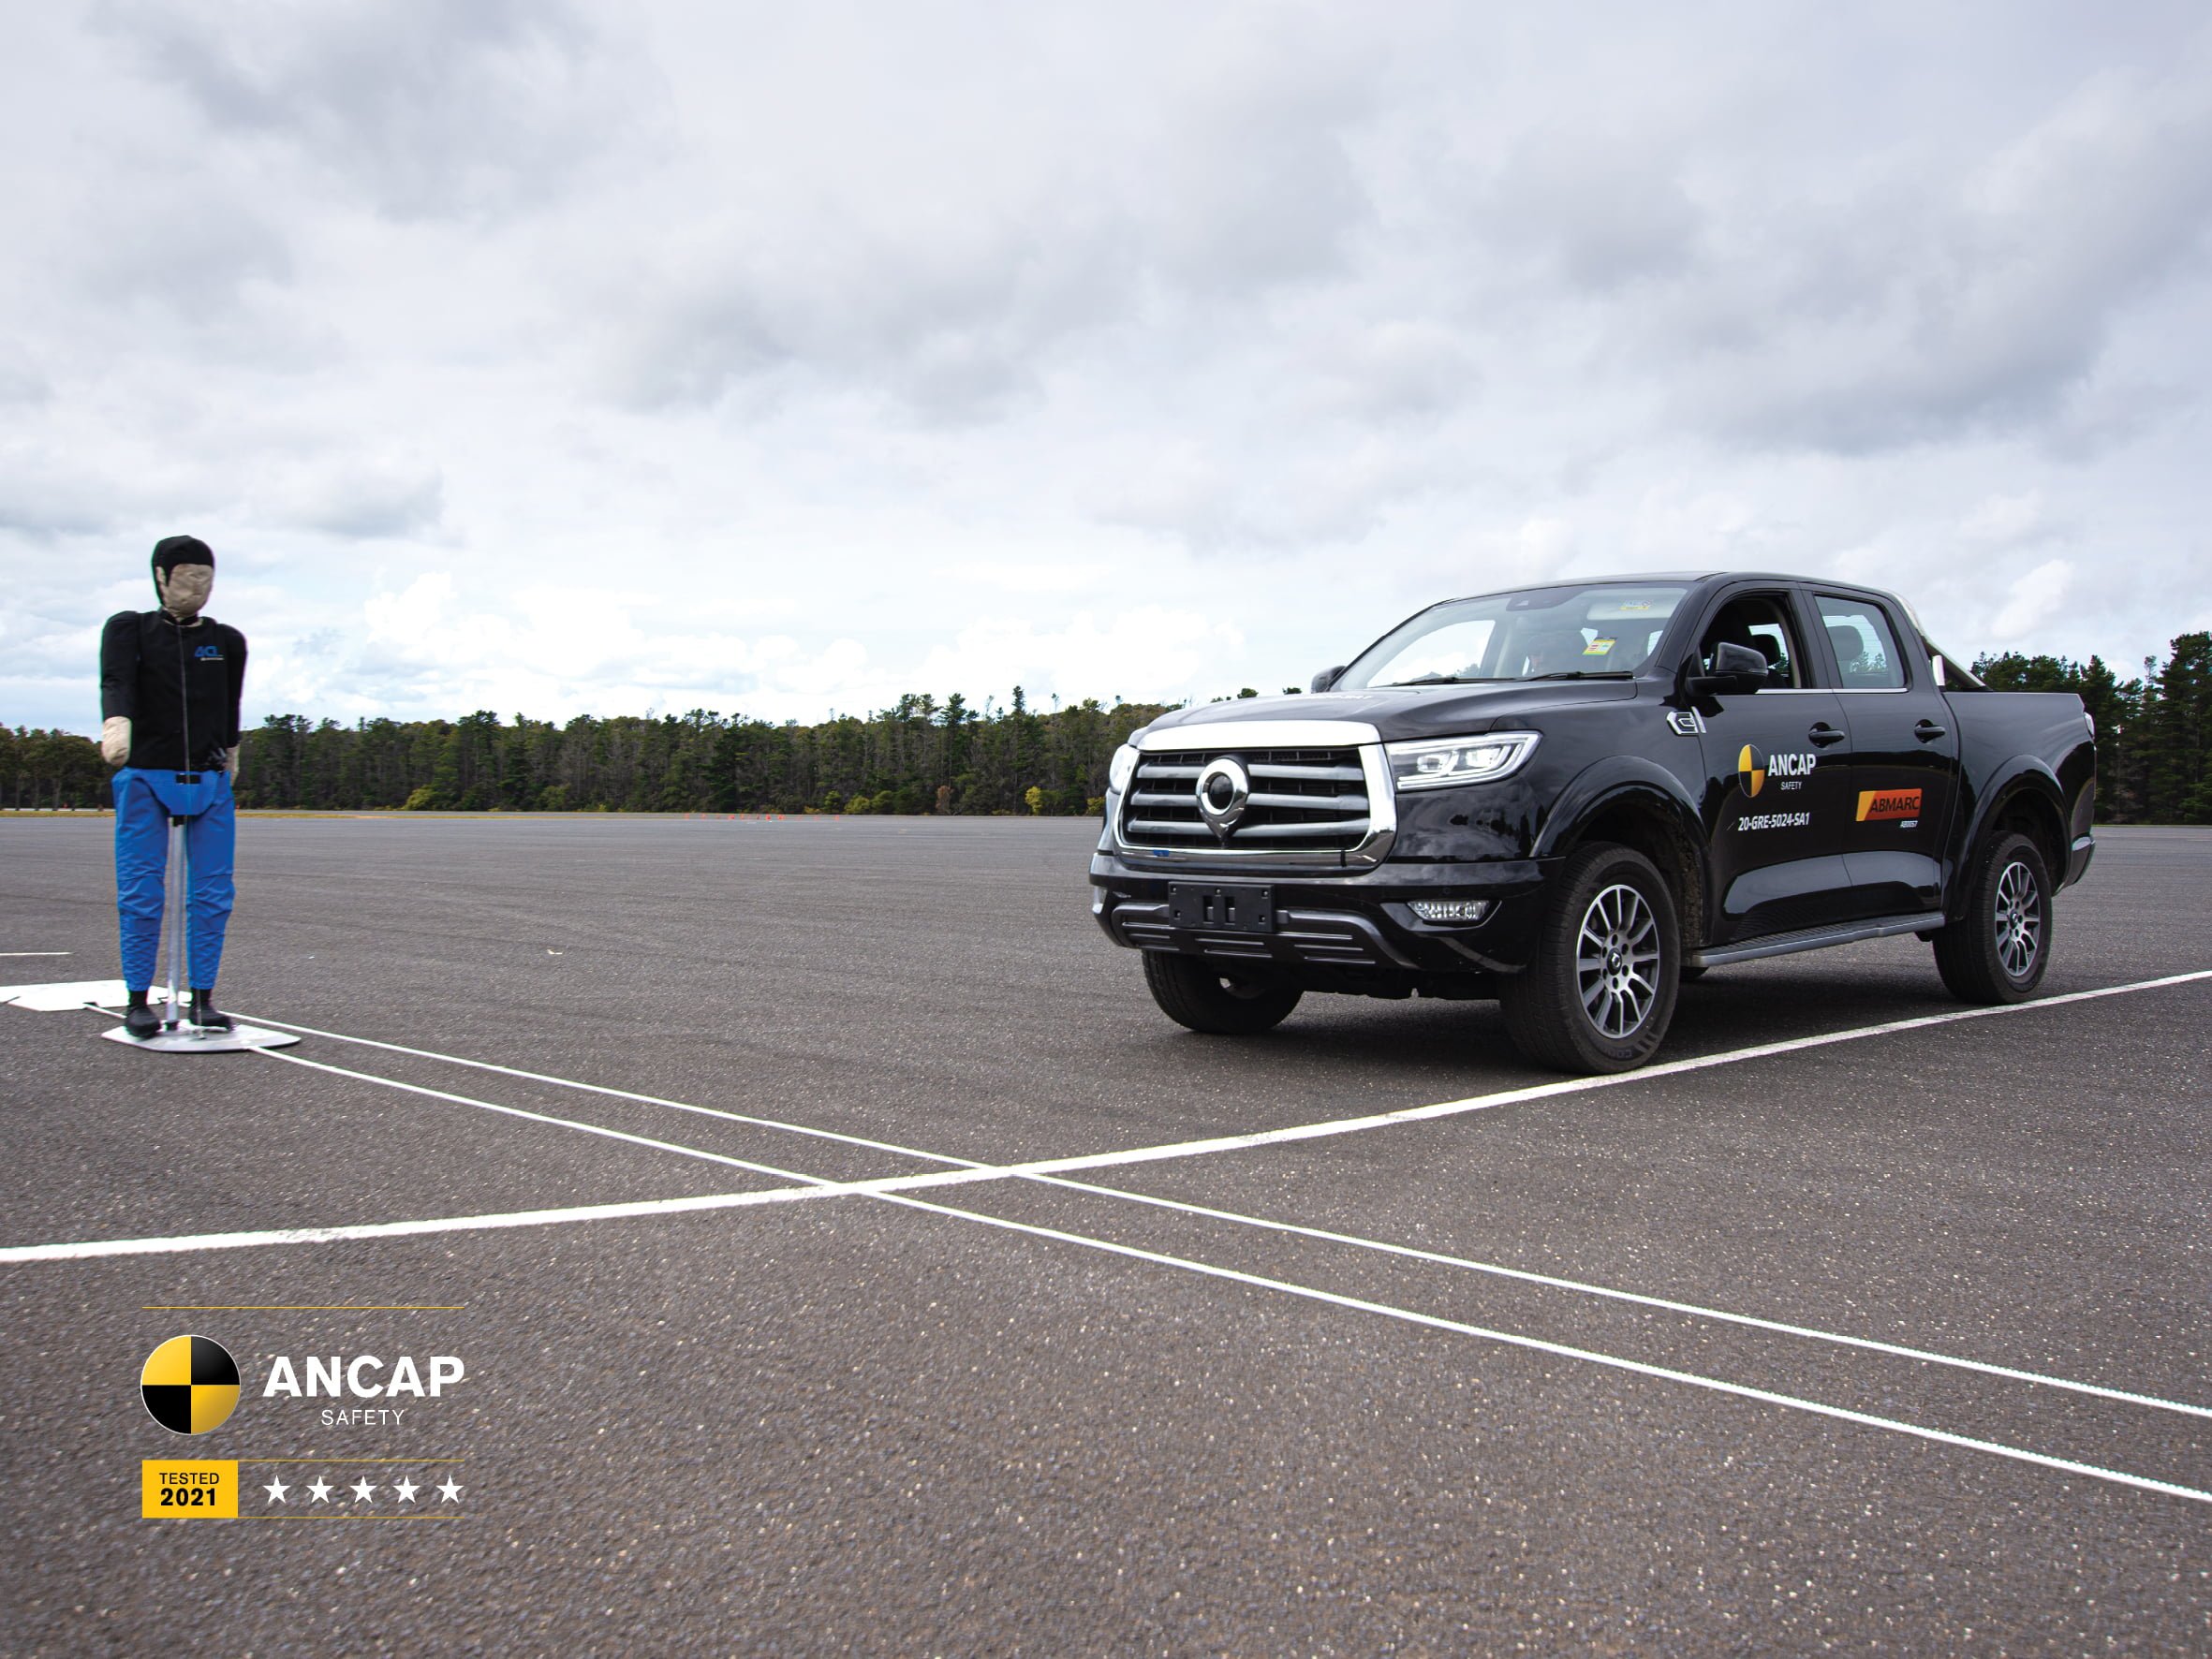 5 star ANCAP safety rating for all GWM Ute dual cab utilities